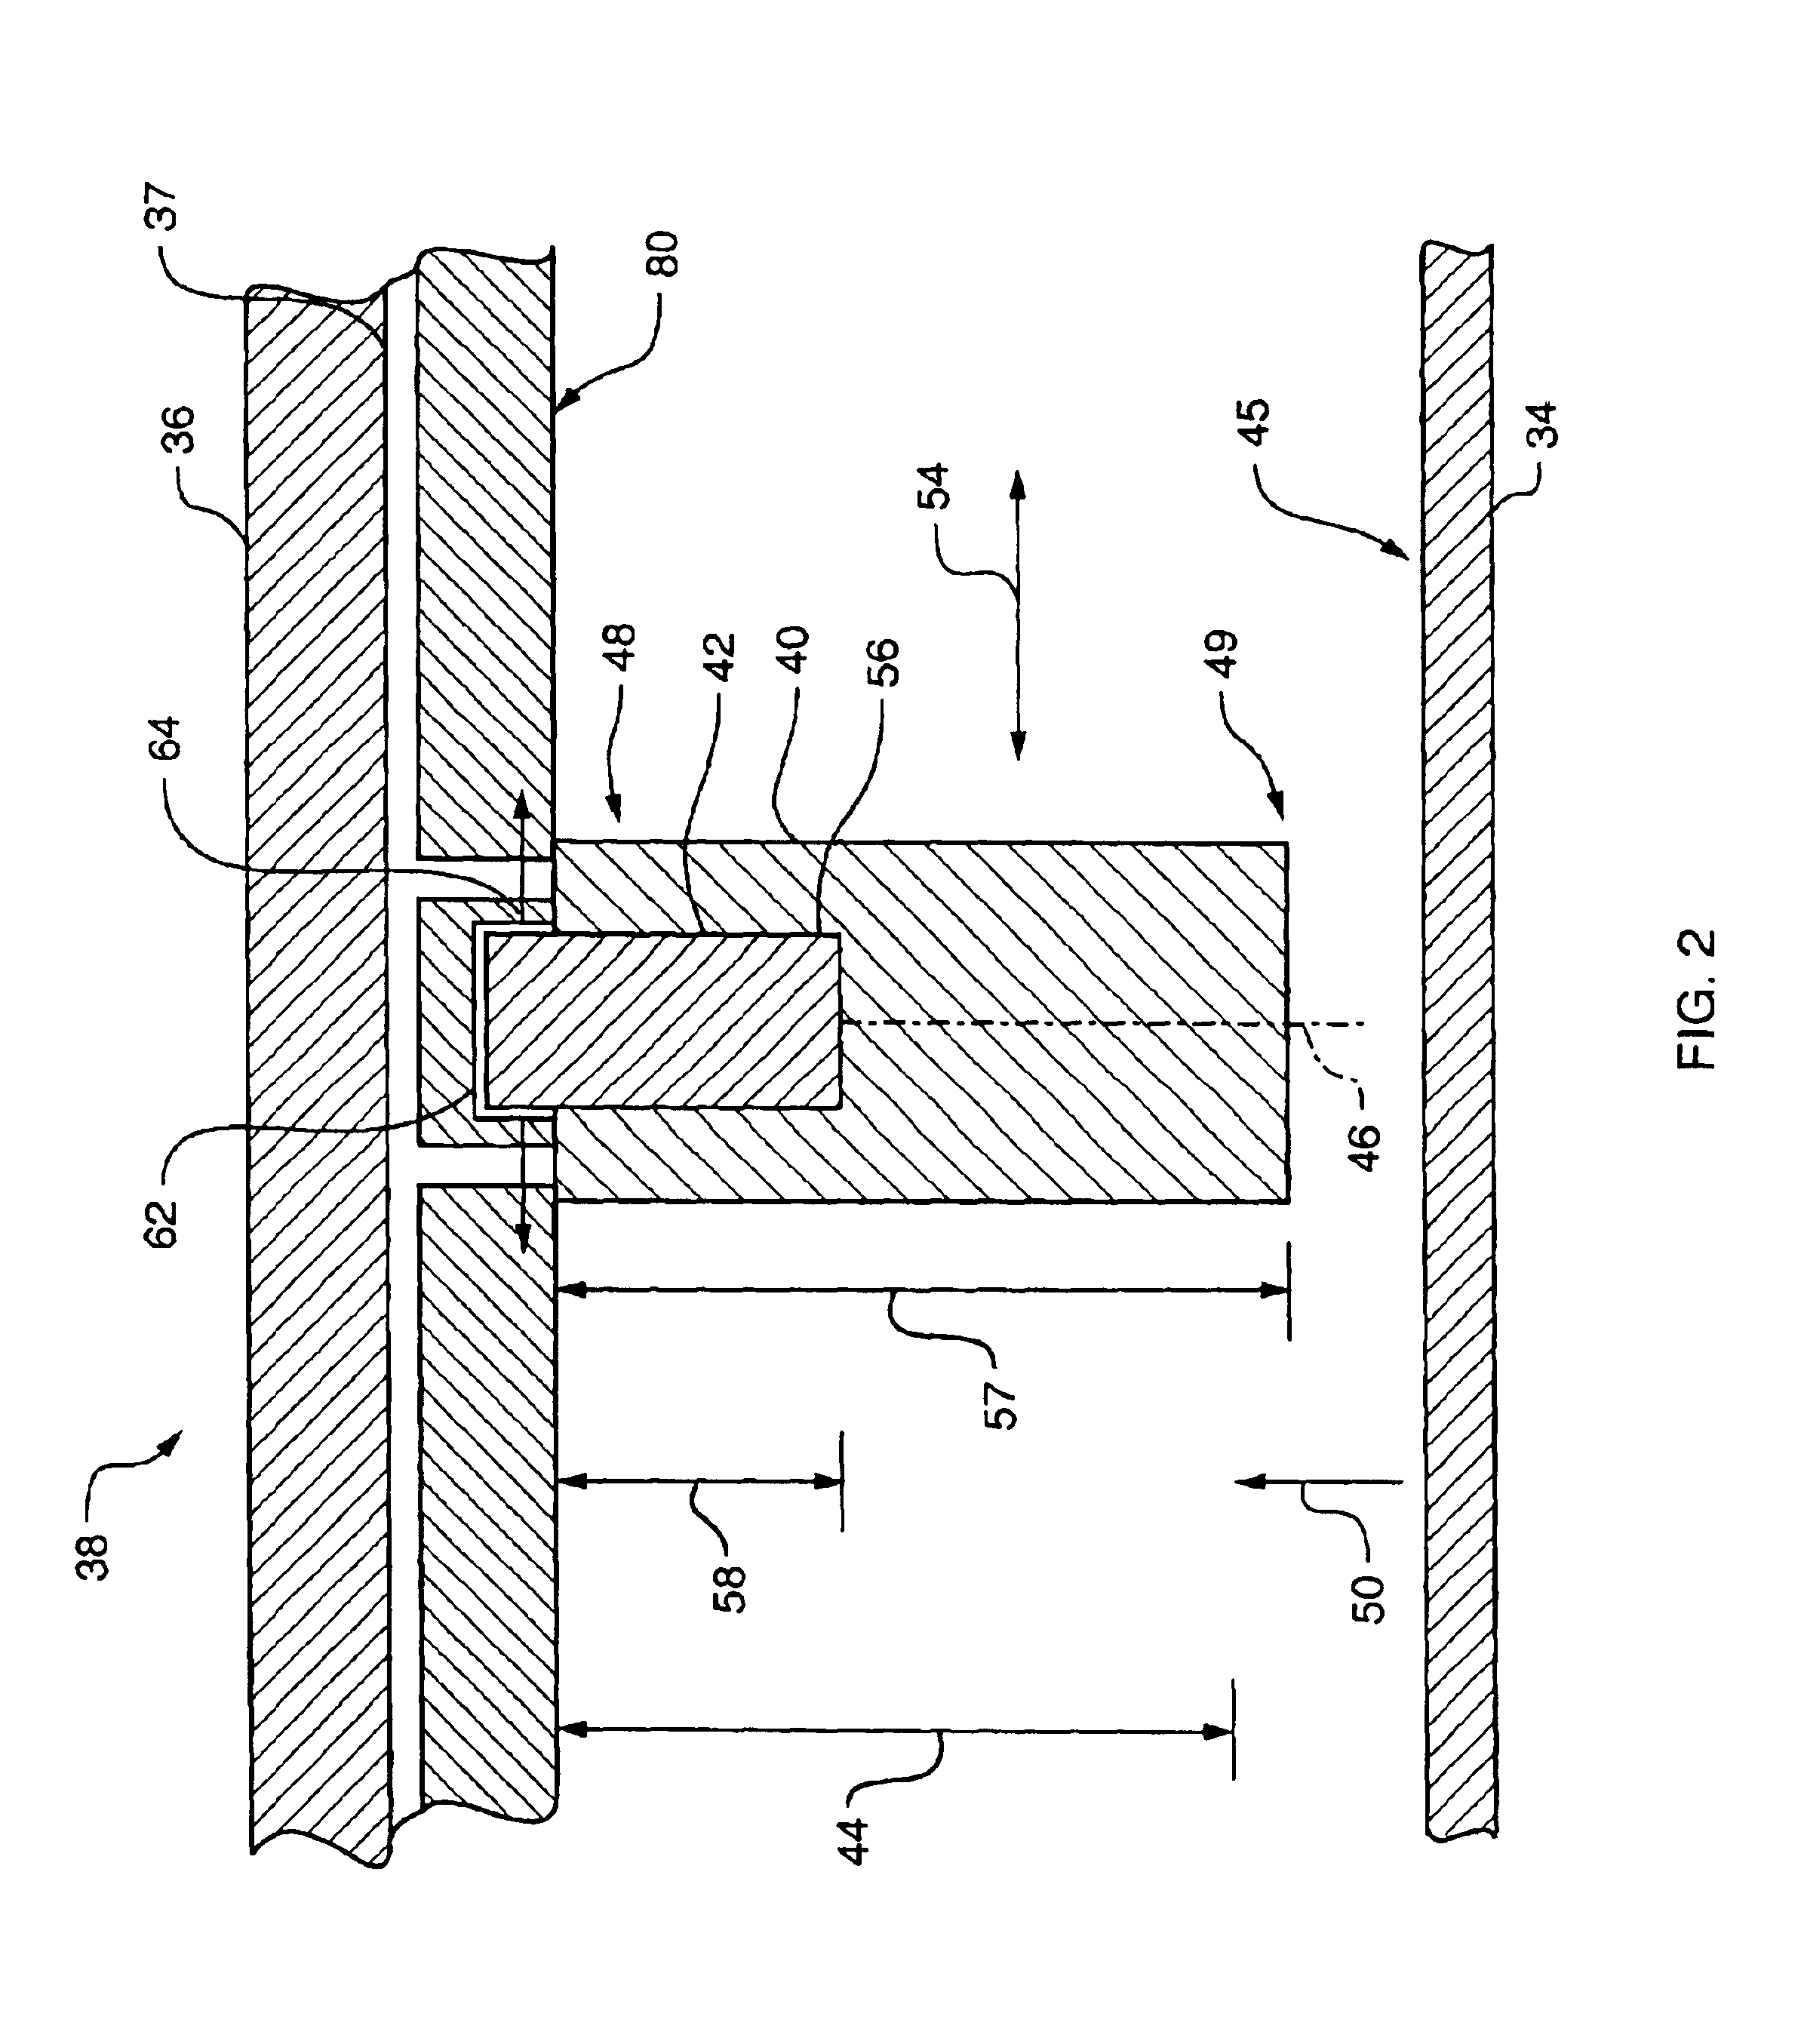 Methods and apparatus for grounding a circuit board